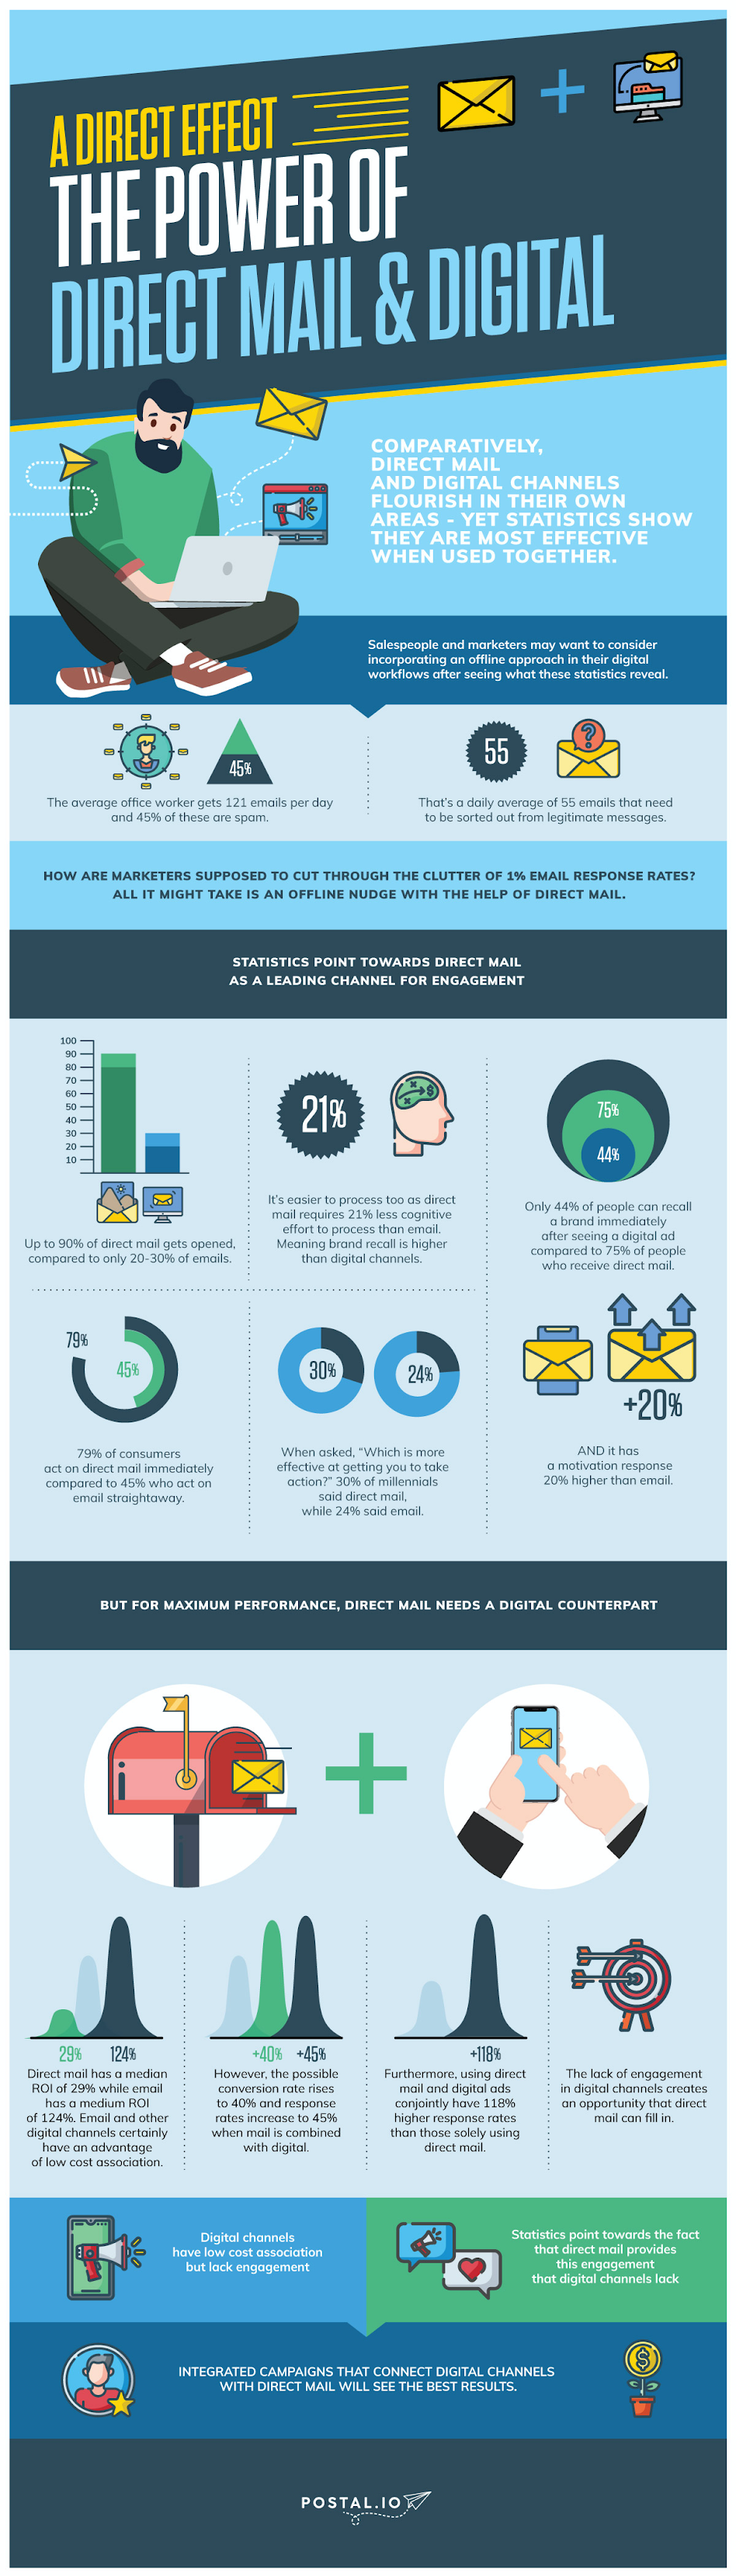 Direct Mail & Digital #infographic